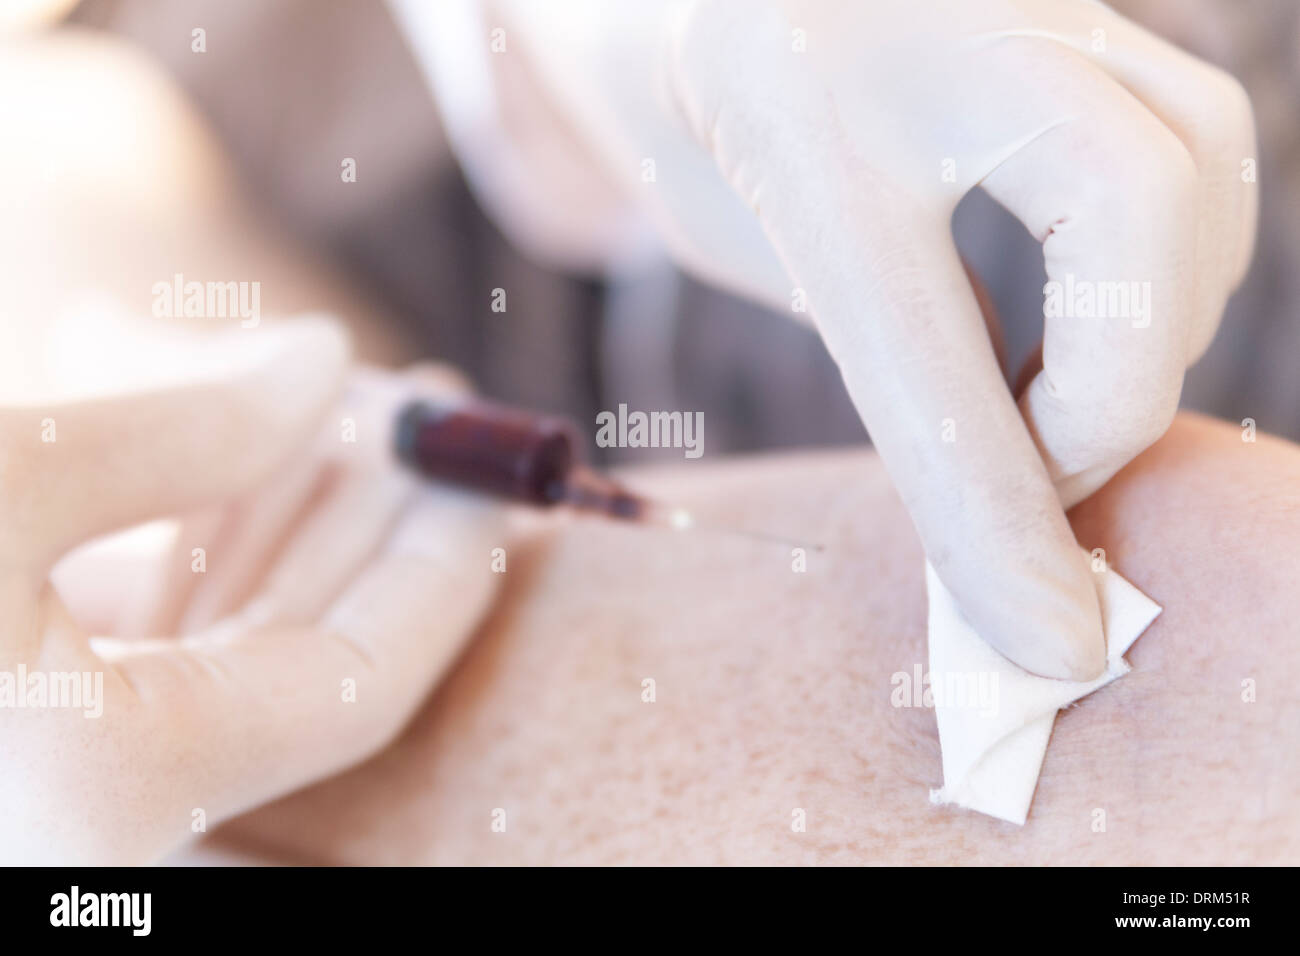 Female alternative practitioner dabing off blood after a blood sample Stock Photo